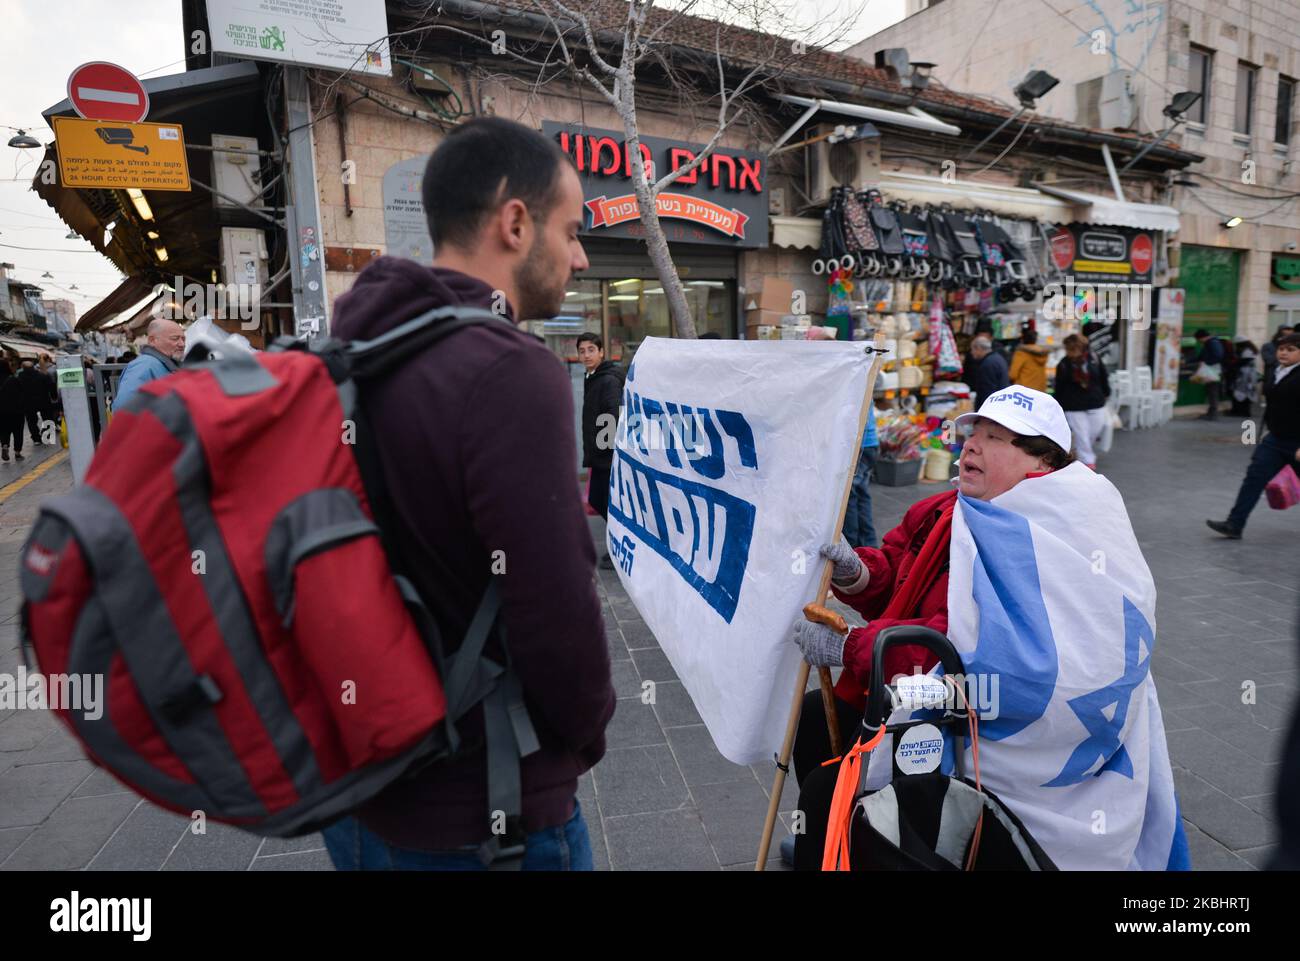 Likud political party campaigner seen near the entrance to Mahane Yehuda market. Israelis head to the polls for the third election in less than a year on March 2nd. On Monday, February 24, 2020, in Jerusalem, Israel. (Photo by Artur Widak/NurPhoto) Stock Photo